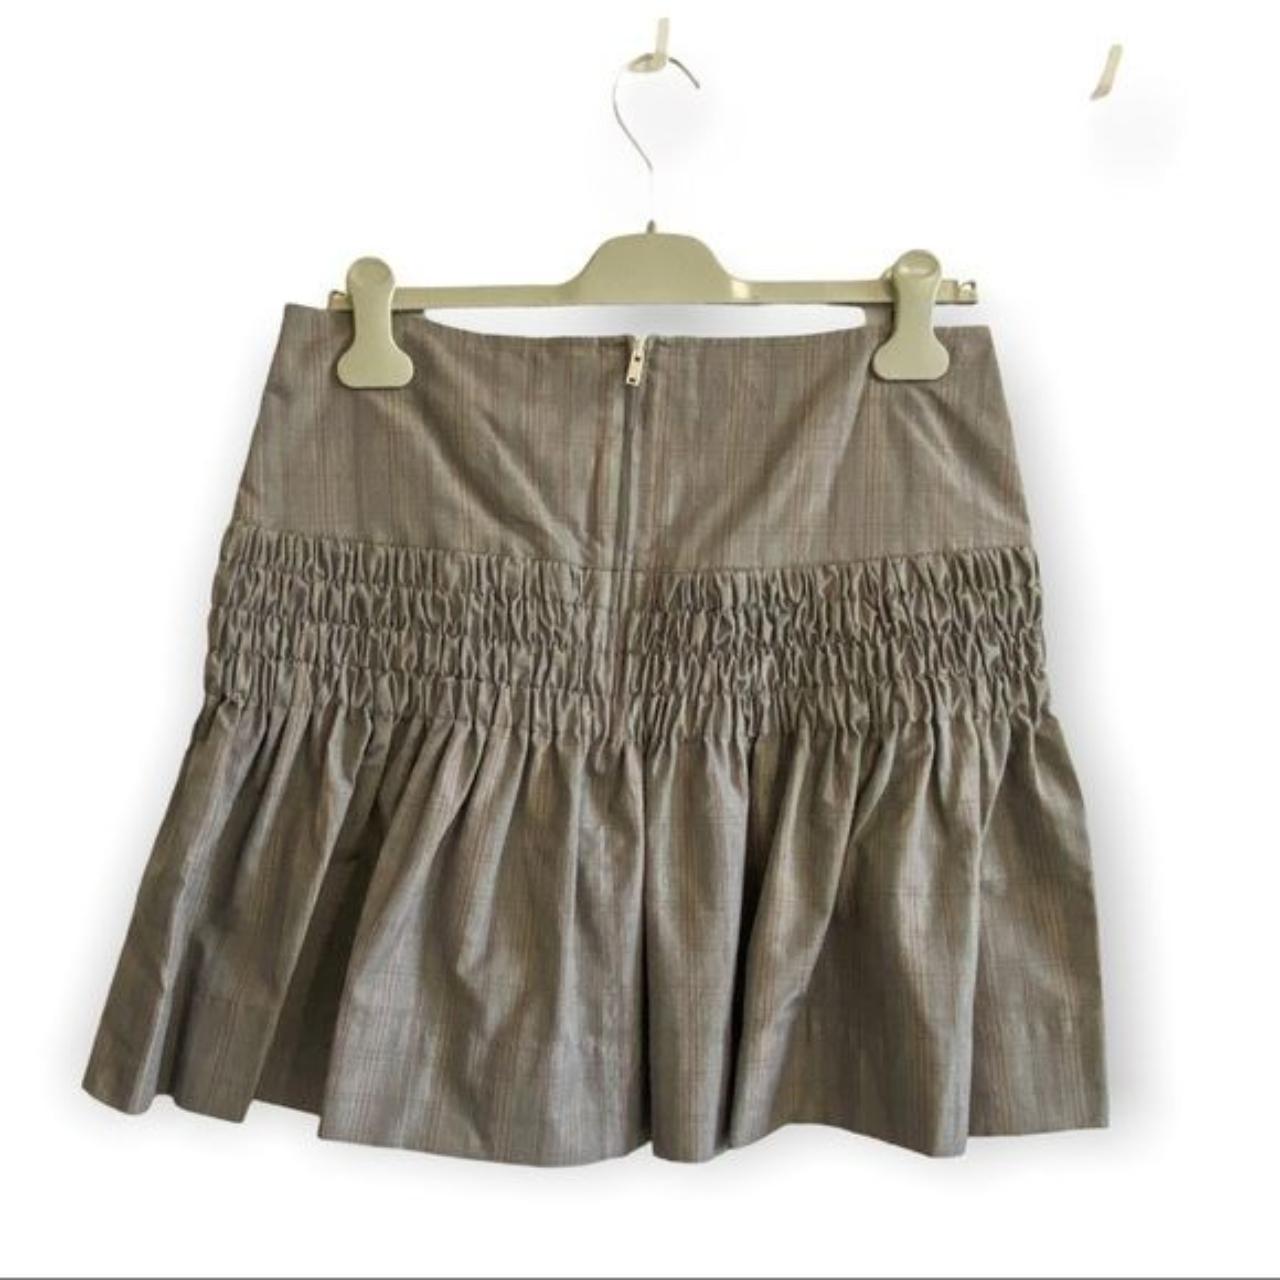 Product Image 2 - Brand new with tag
Isabel Marant